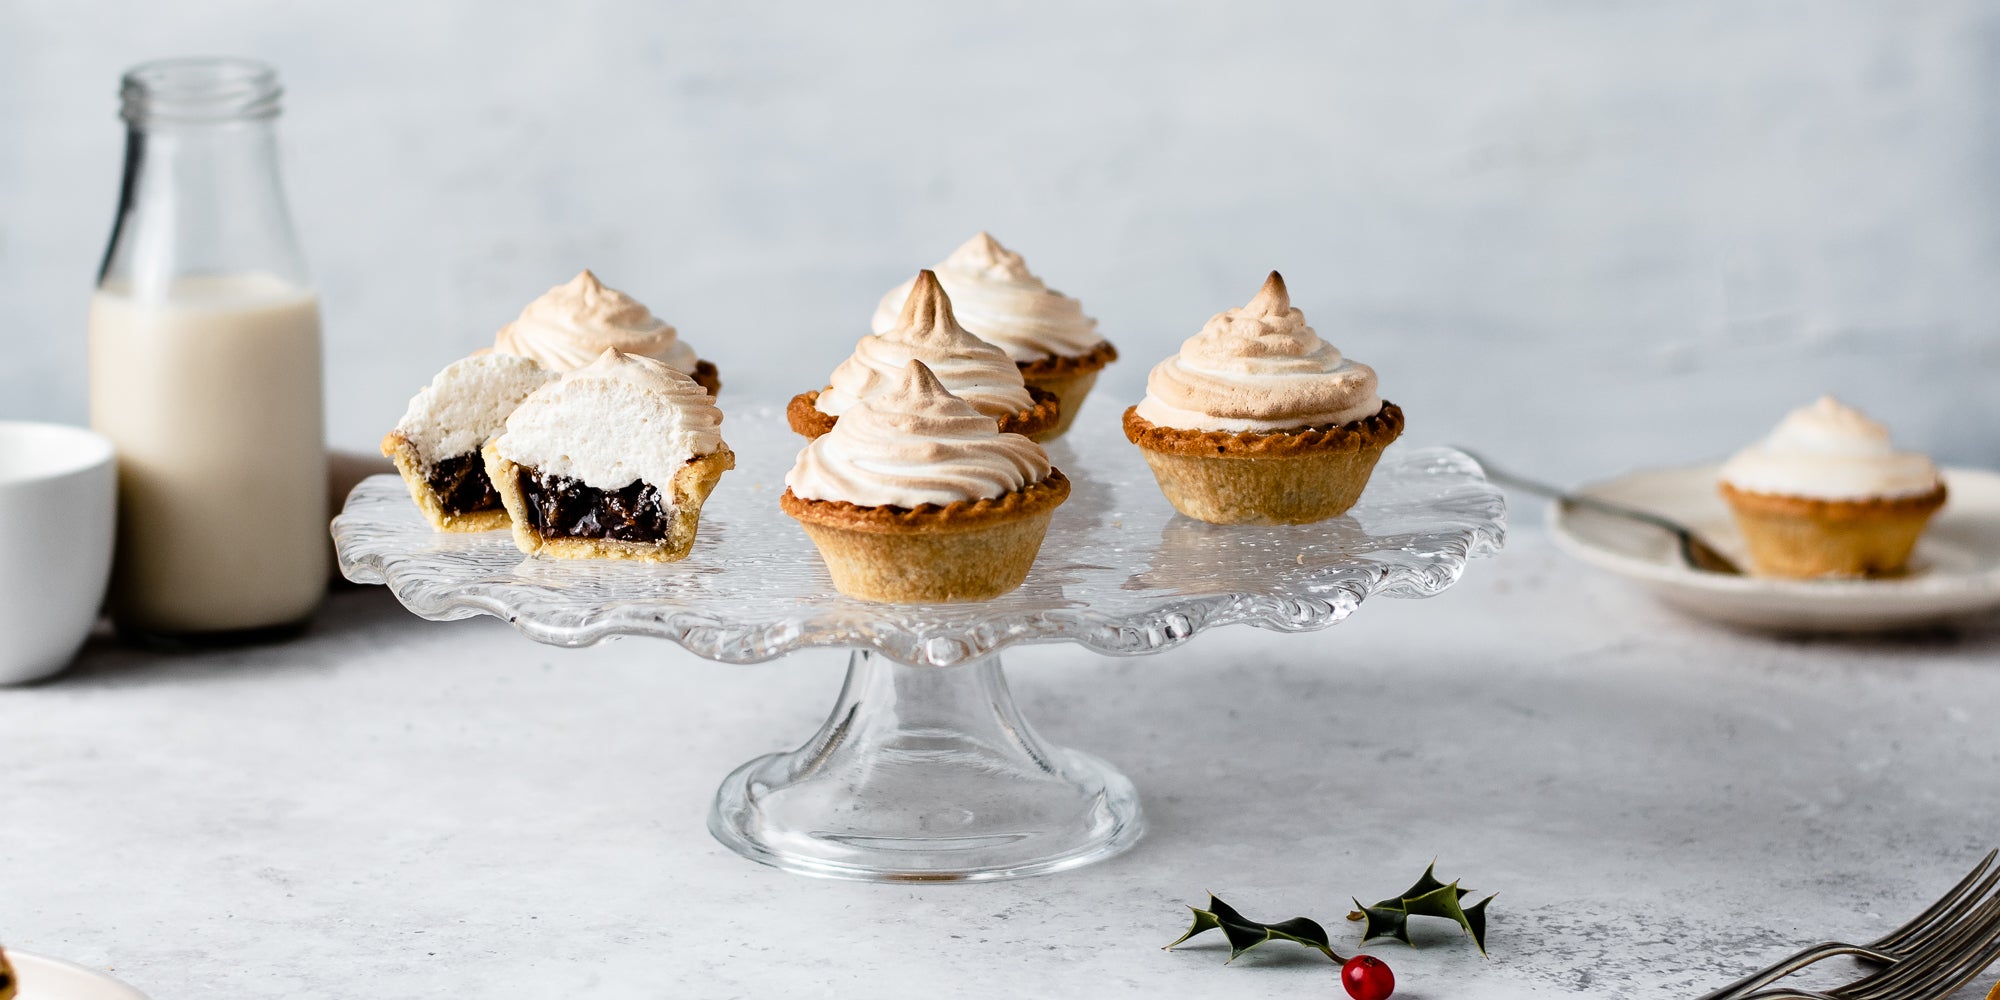 Meringue Topped Mince Pies on a glass cake stand with a close up of a mincepie cut in half showing the inside filled with mincemeat and meringue